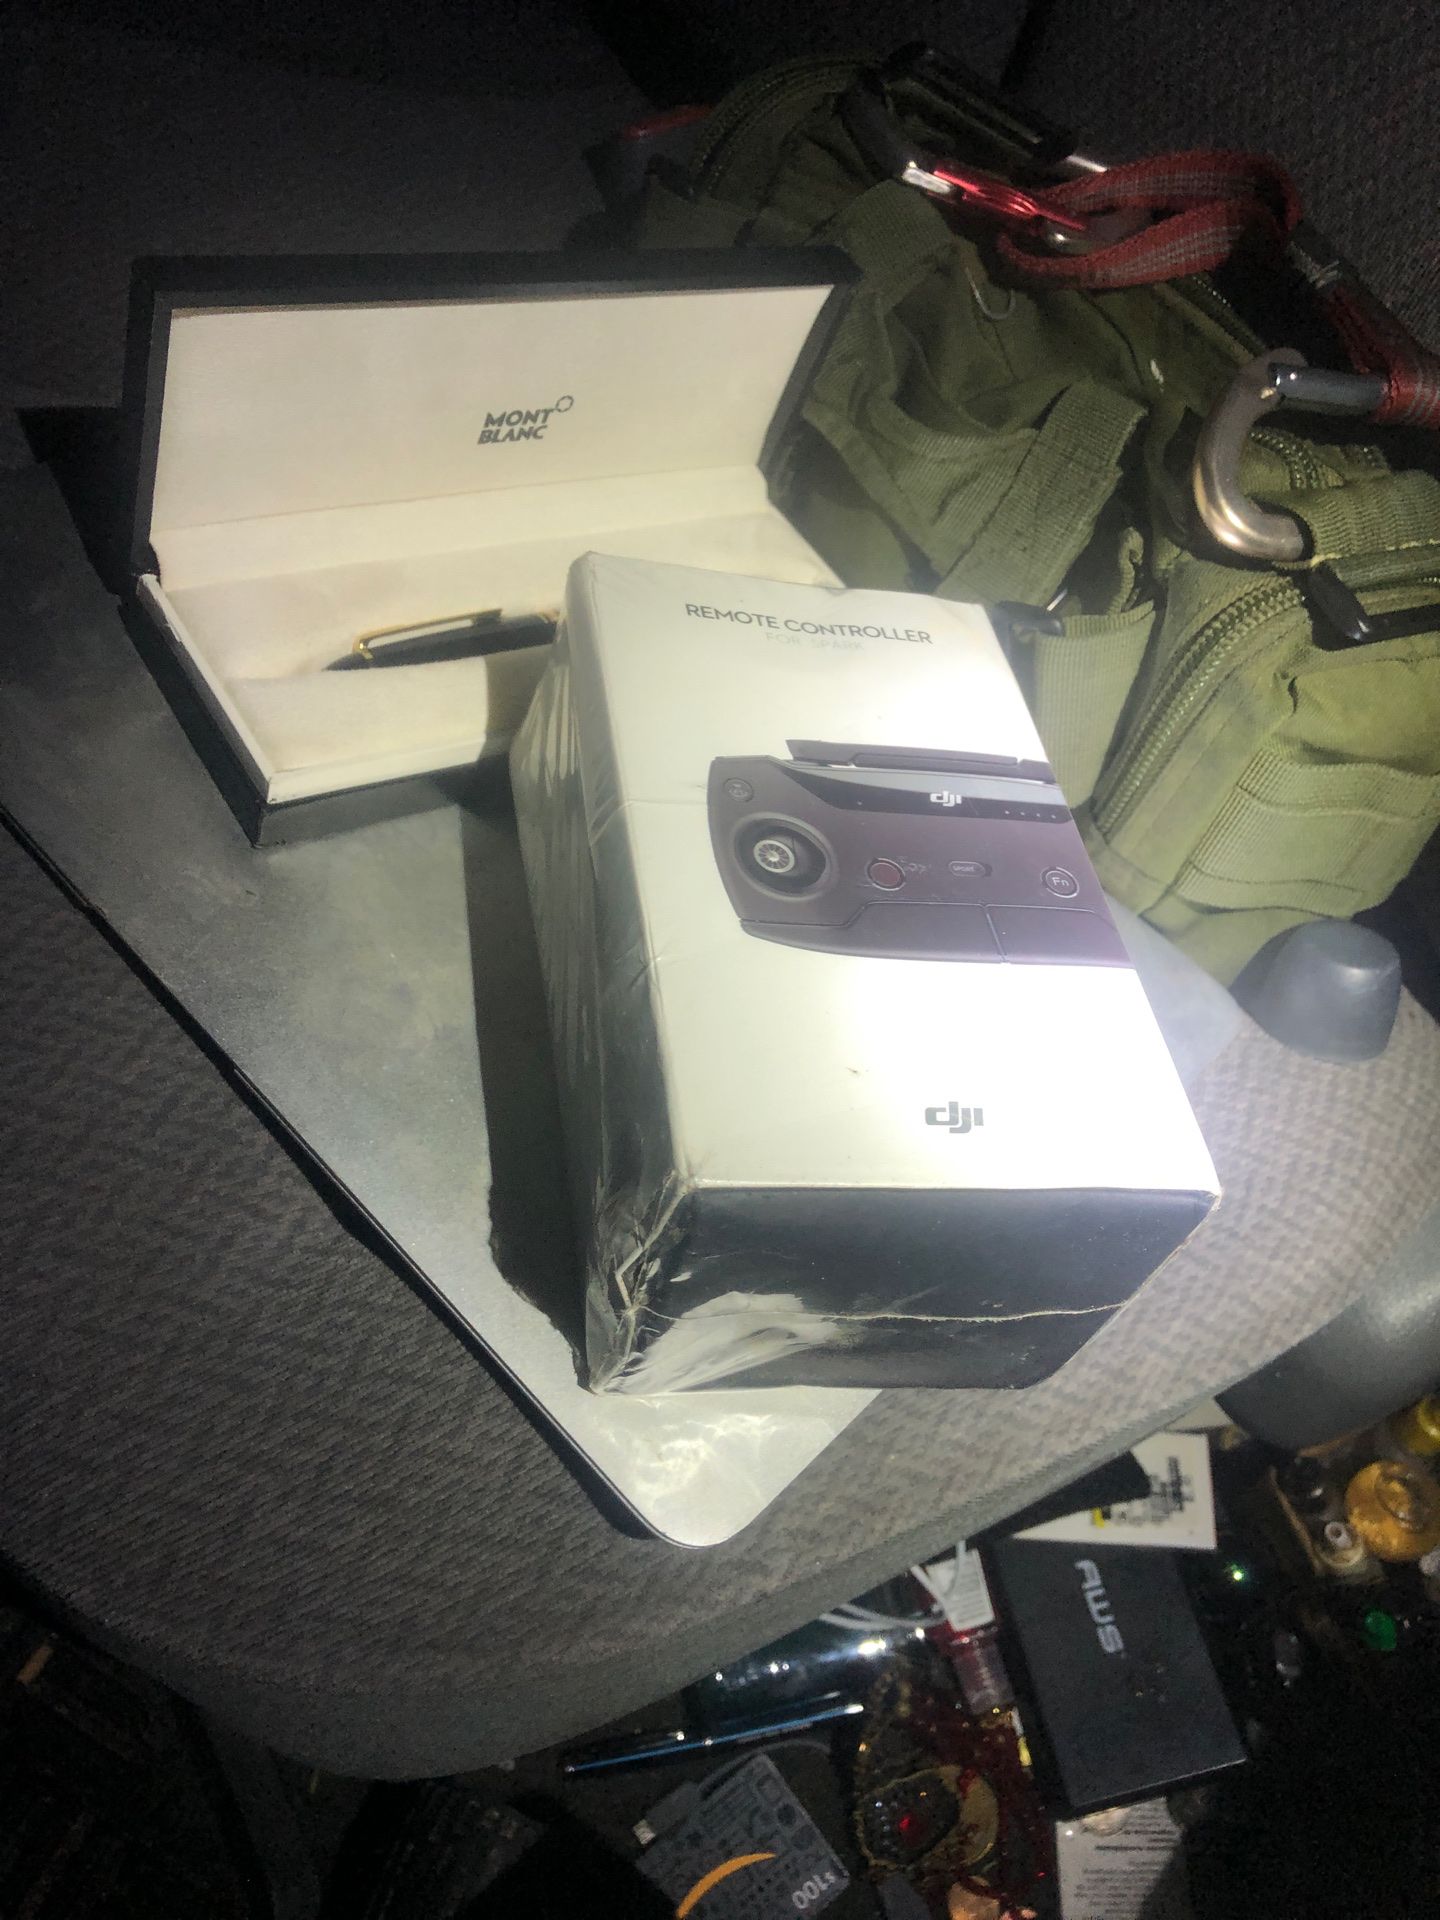 Dji spark remote new in box, box is a bit beat up so selling as used but sealed it is